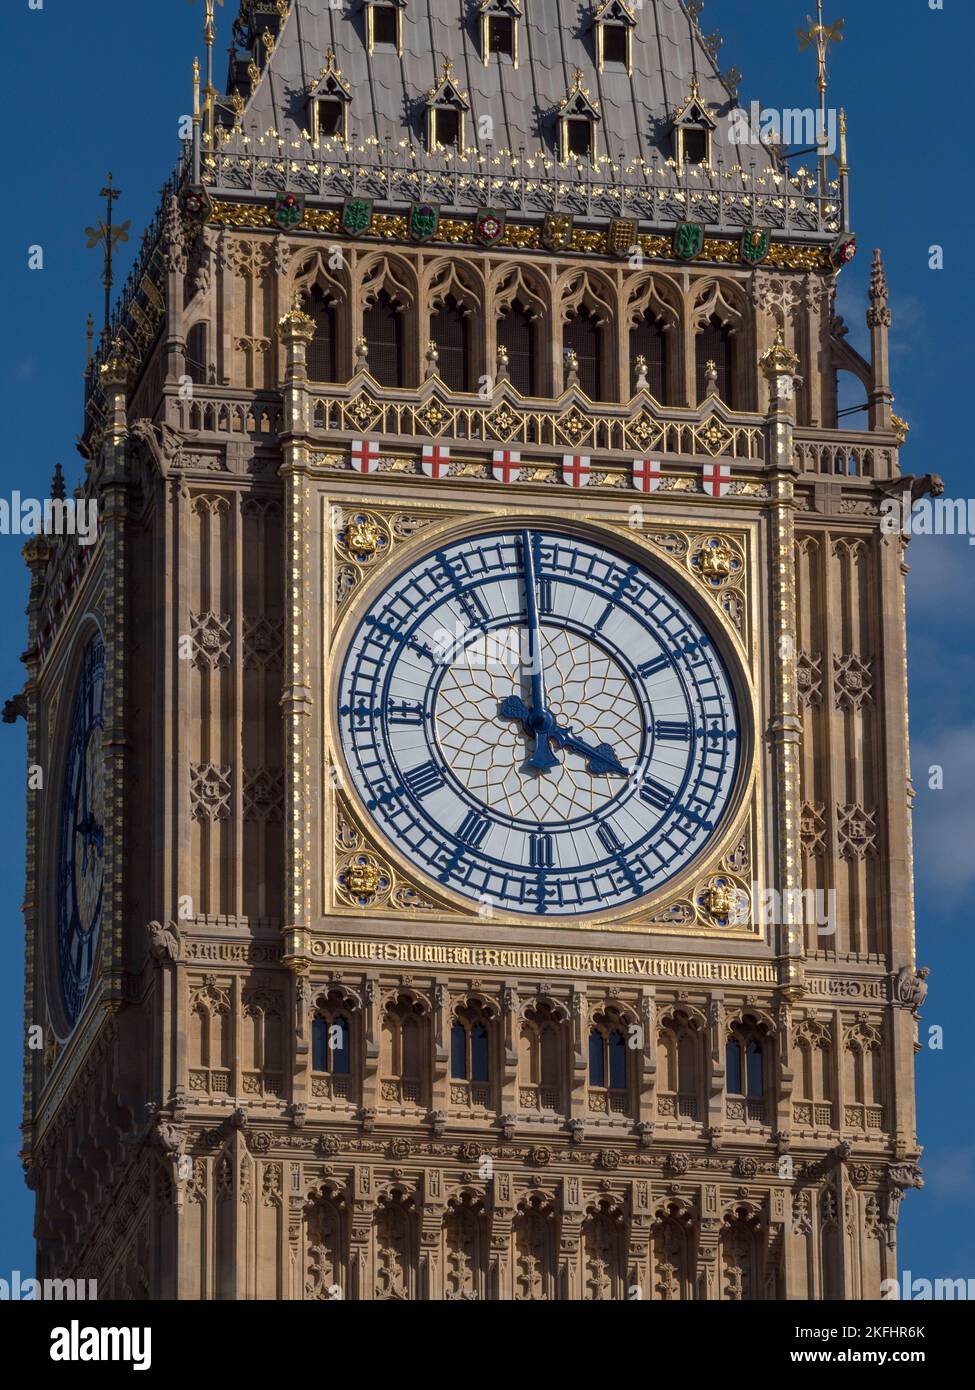 The Elizabeth Tower (sometimes called Big Ben) at the Palace of Westminster, London, UK after renovation (October 2022) Stock Photo